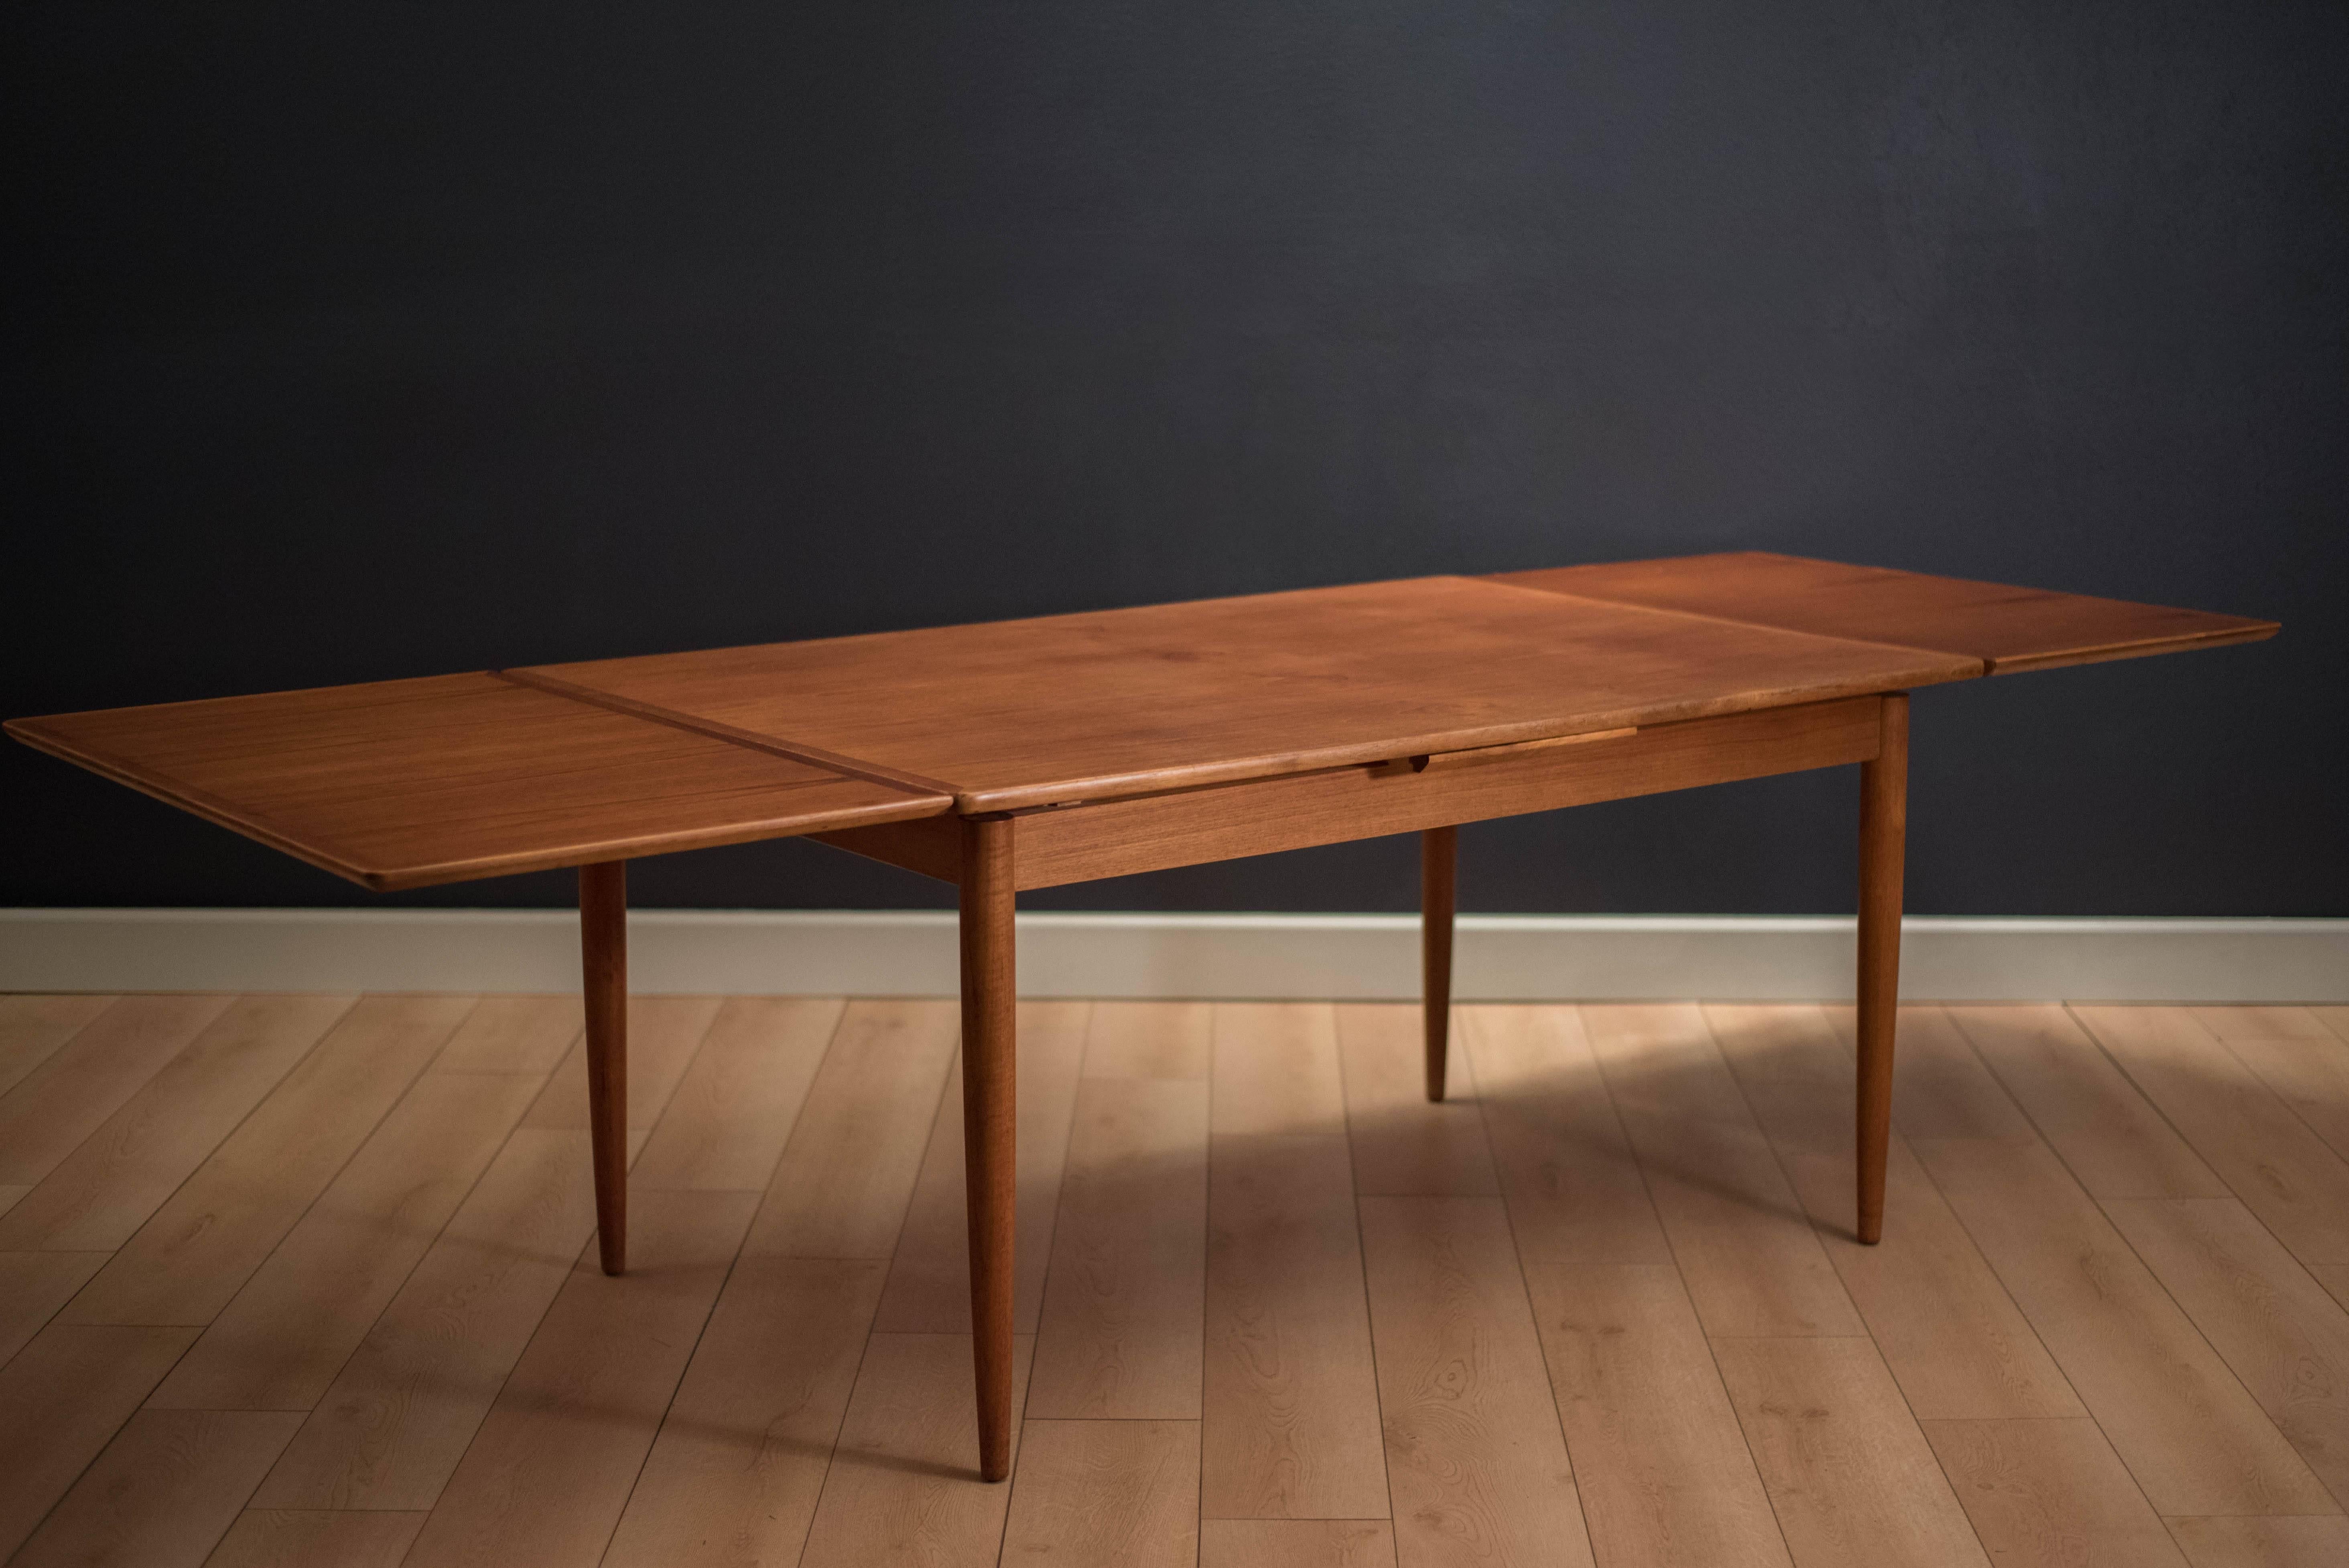 Danish Modern teak draw leaf dining table, circa 1960s. This piece expands with two leaves that cleverly store underneath table. 

Measures 106.5" fully extended.

